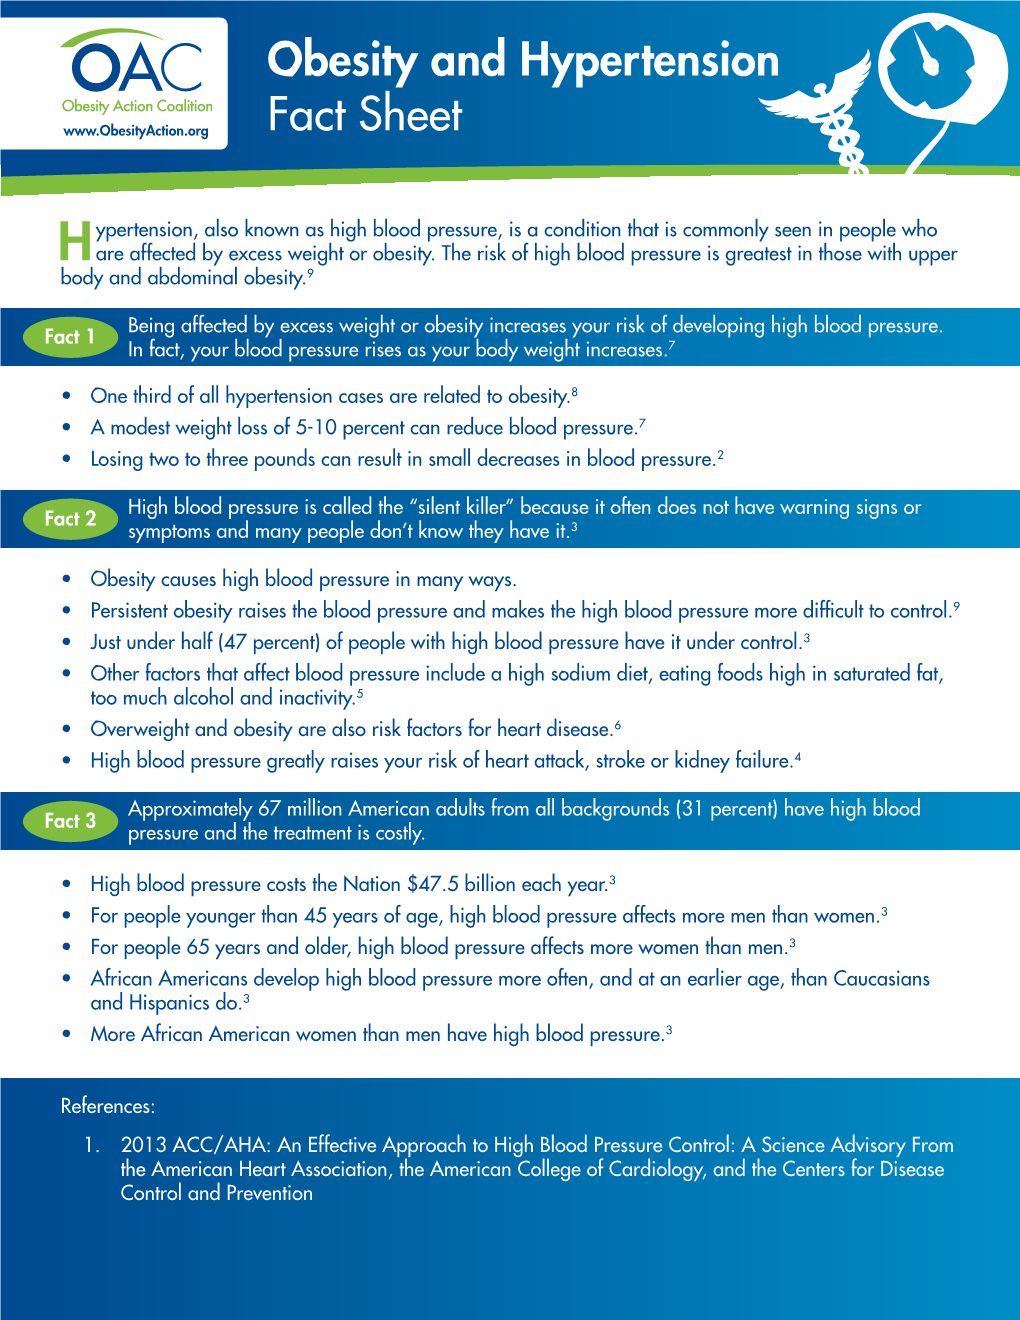 Obesity and Hypertension Fact Sheet